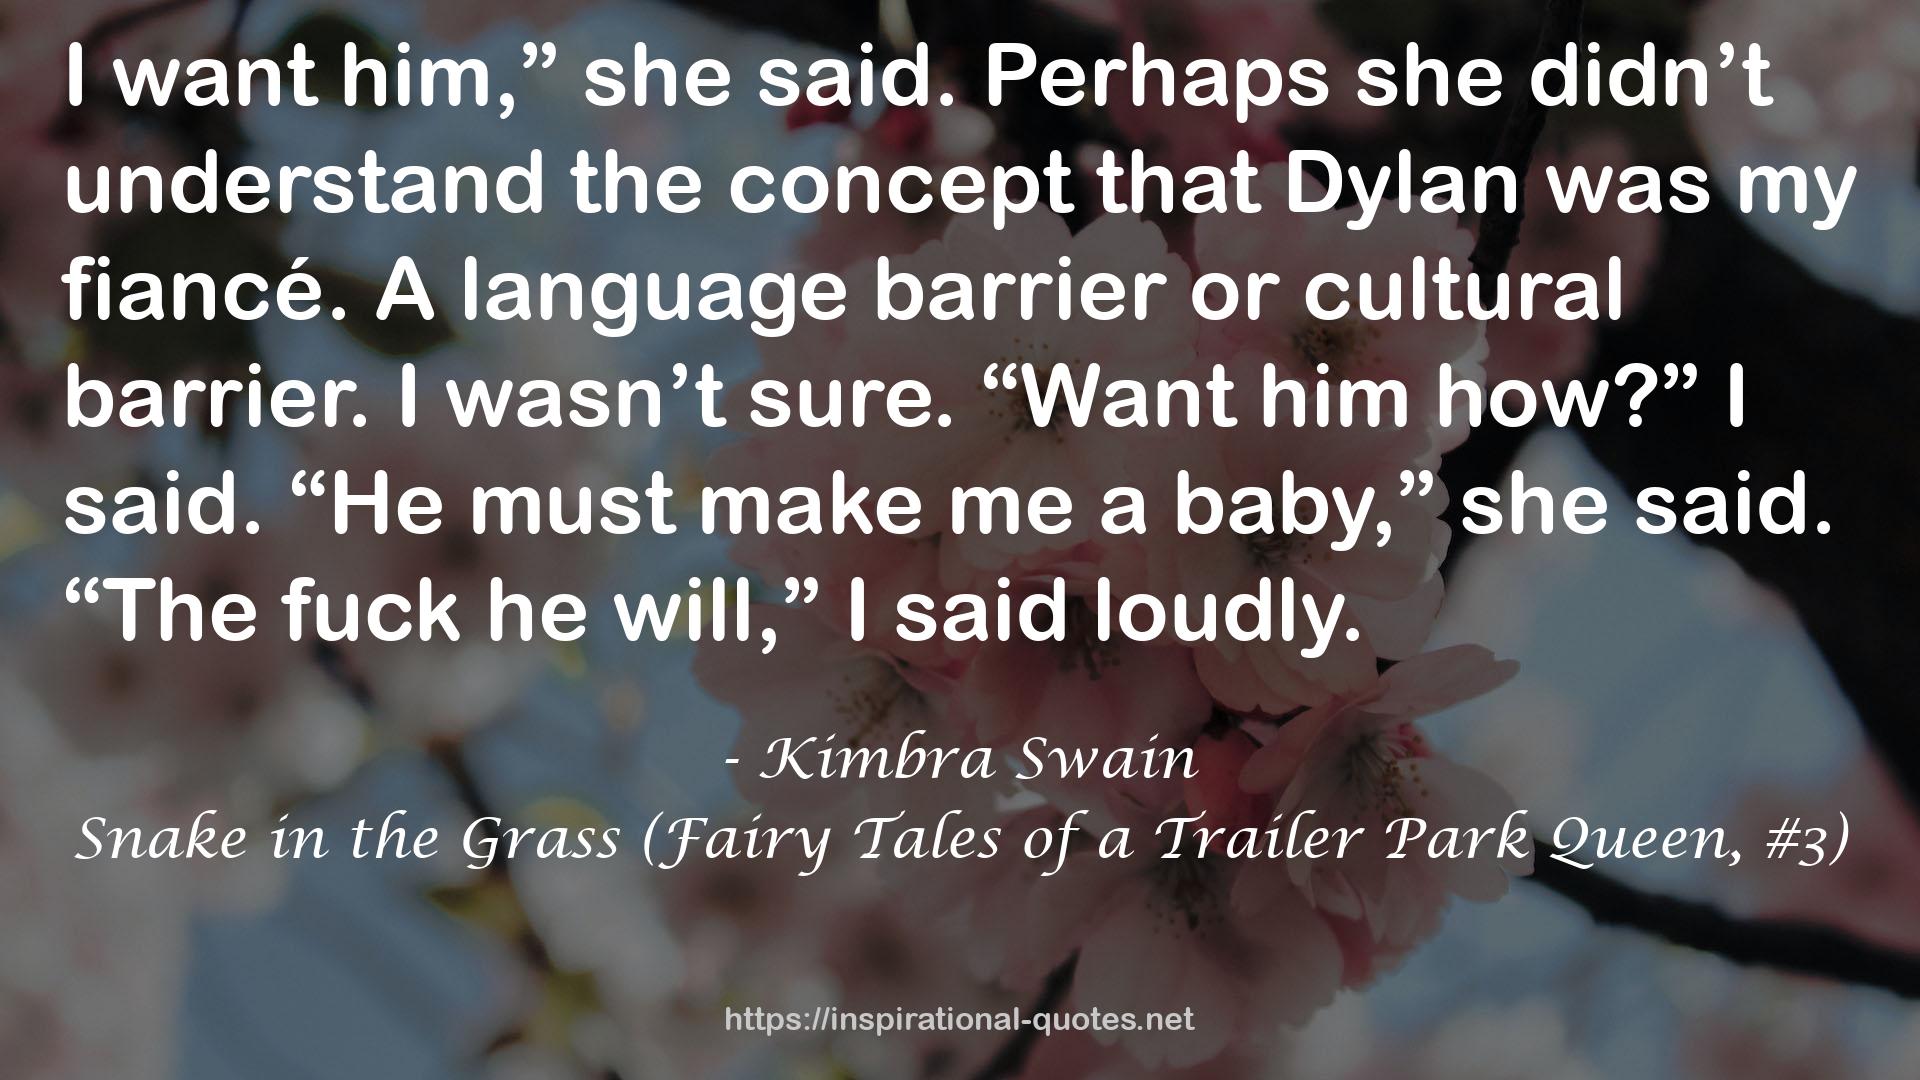 Snake in the Grass (Fairy Tales of a Trailer Park Queen, #3) QUOTES